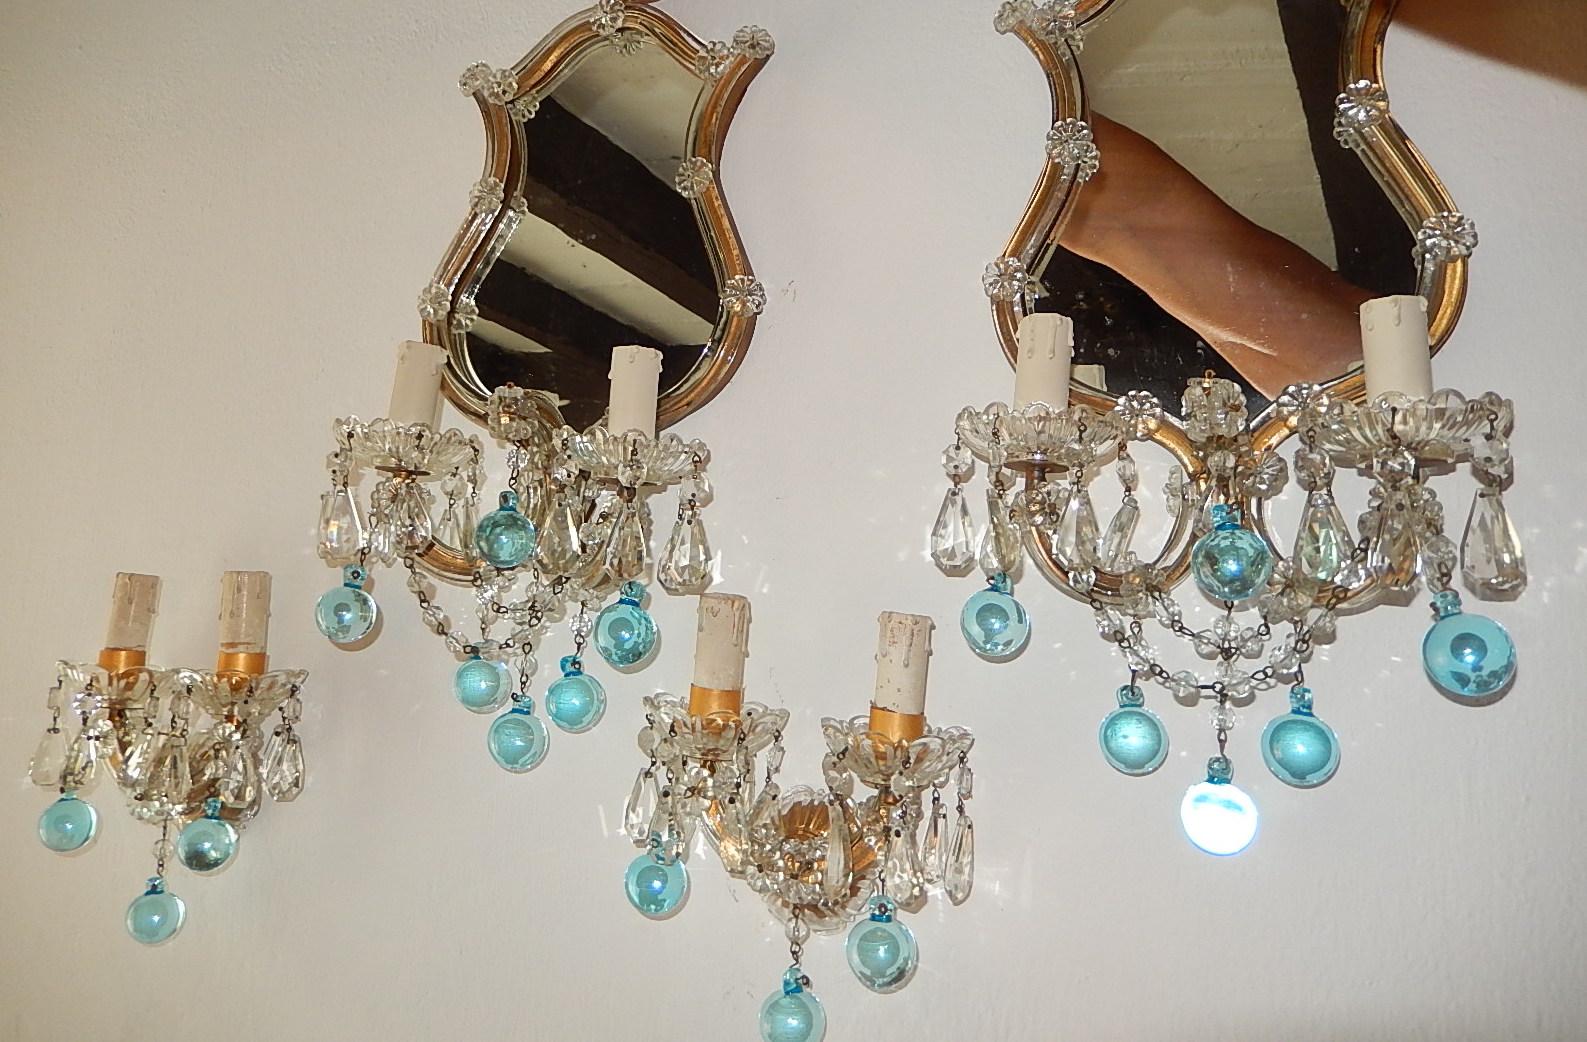 This set consists of four sconces, two with mirrors and two without. I have the matching nine-light chandelier as well. Gilt metal with Murano blown glass covering. Adorning rare aqua blue Murano balls throughout with swags of beads and crystal